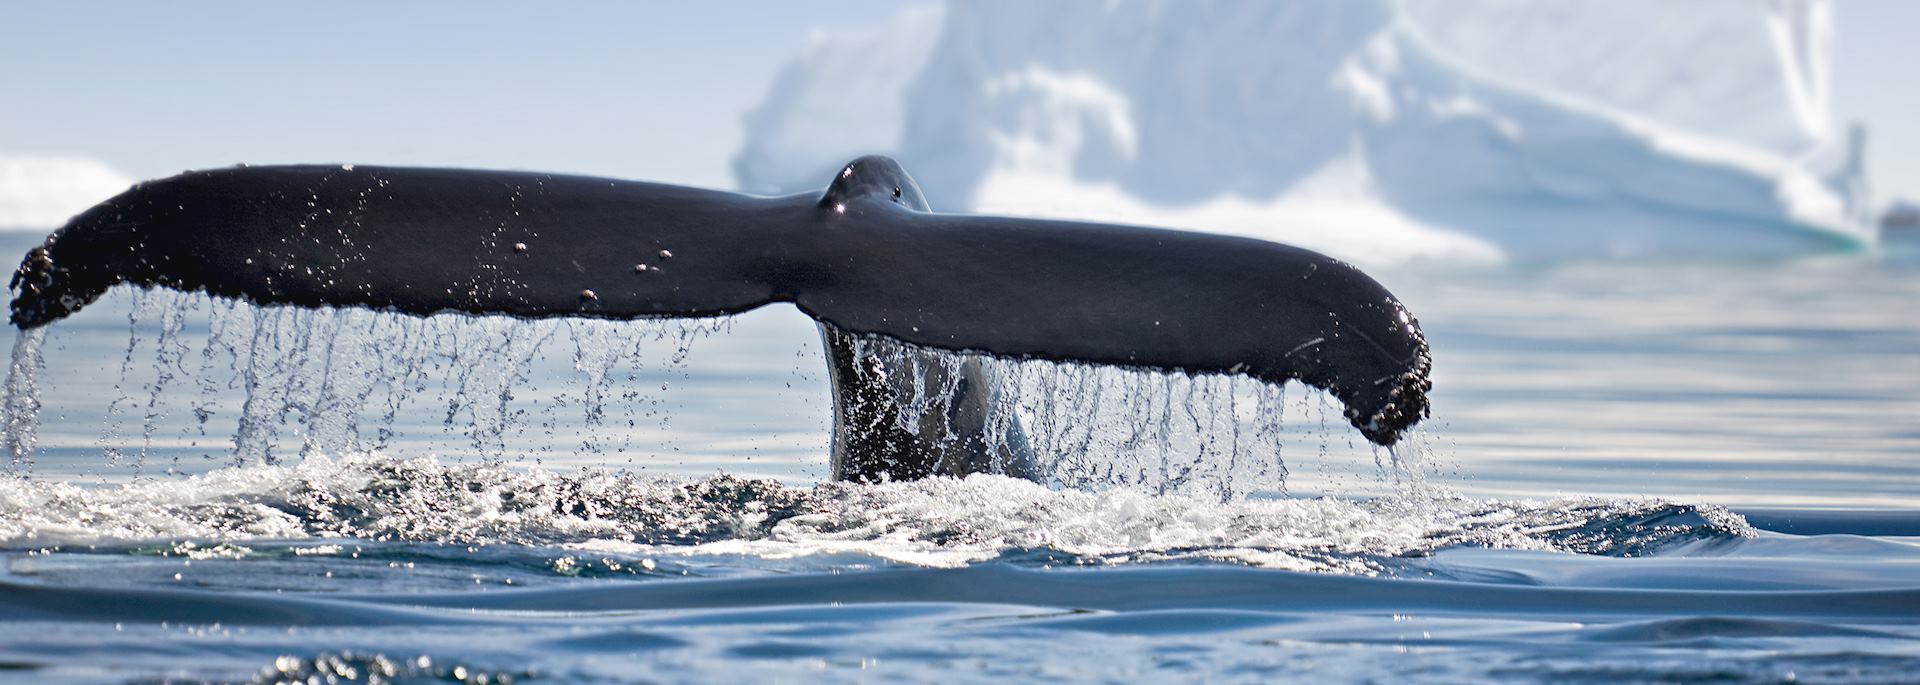 Whale in Antarctica